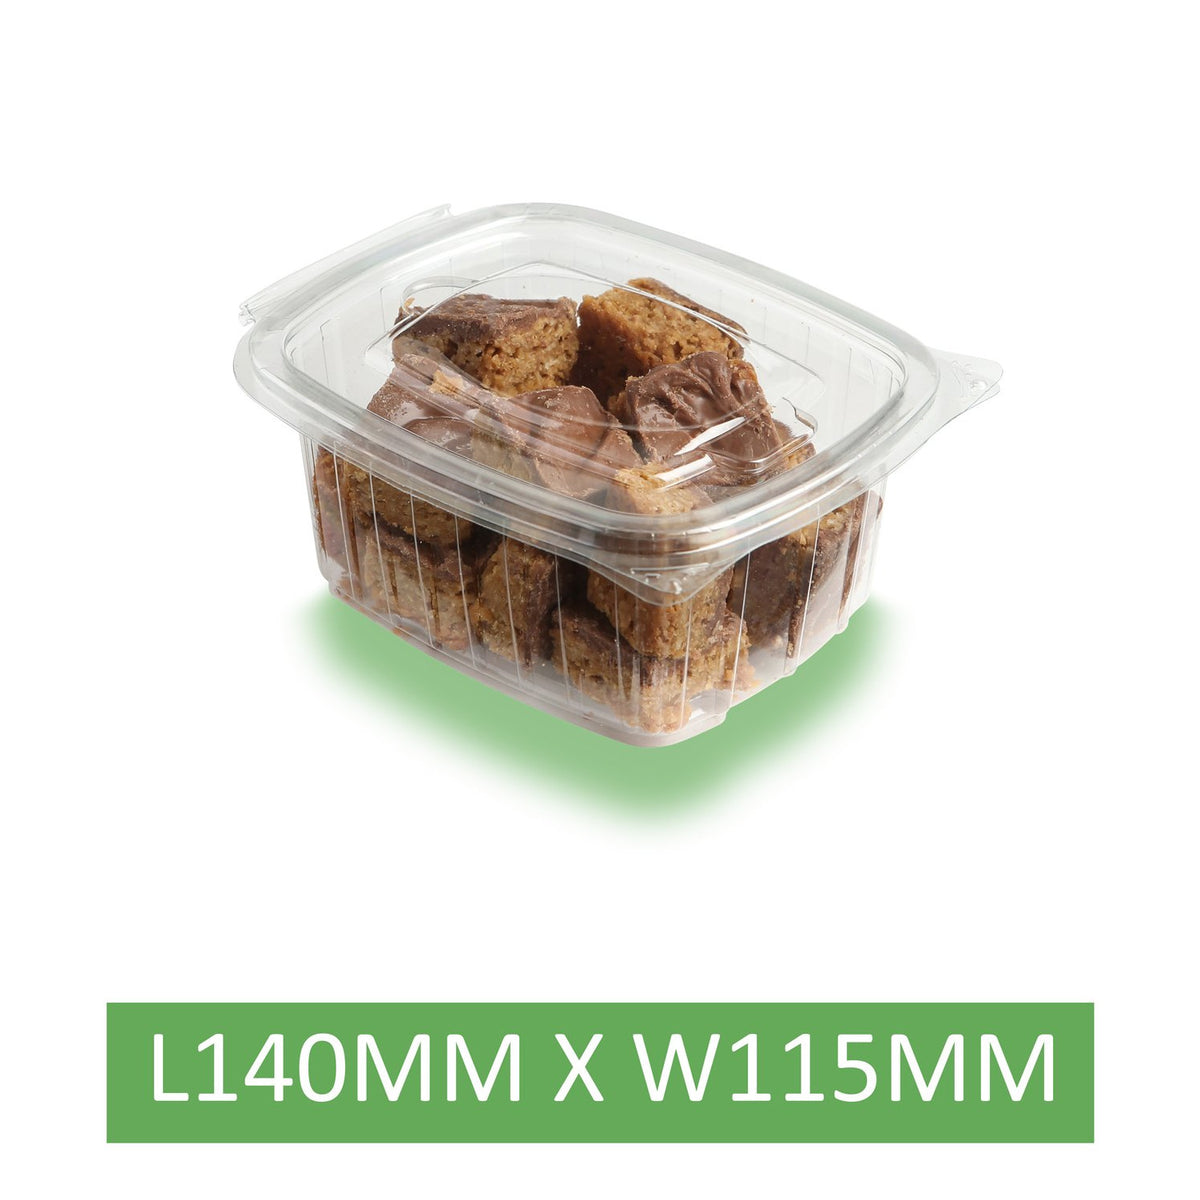 200 x 500cc Clear Cold Food/Salad/Cake Container With Hinged Lid (140mm x 115mm x 60mm) Recyclable rpet - Caterline -